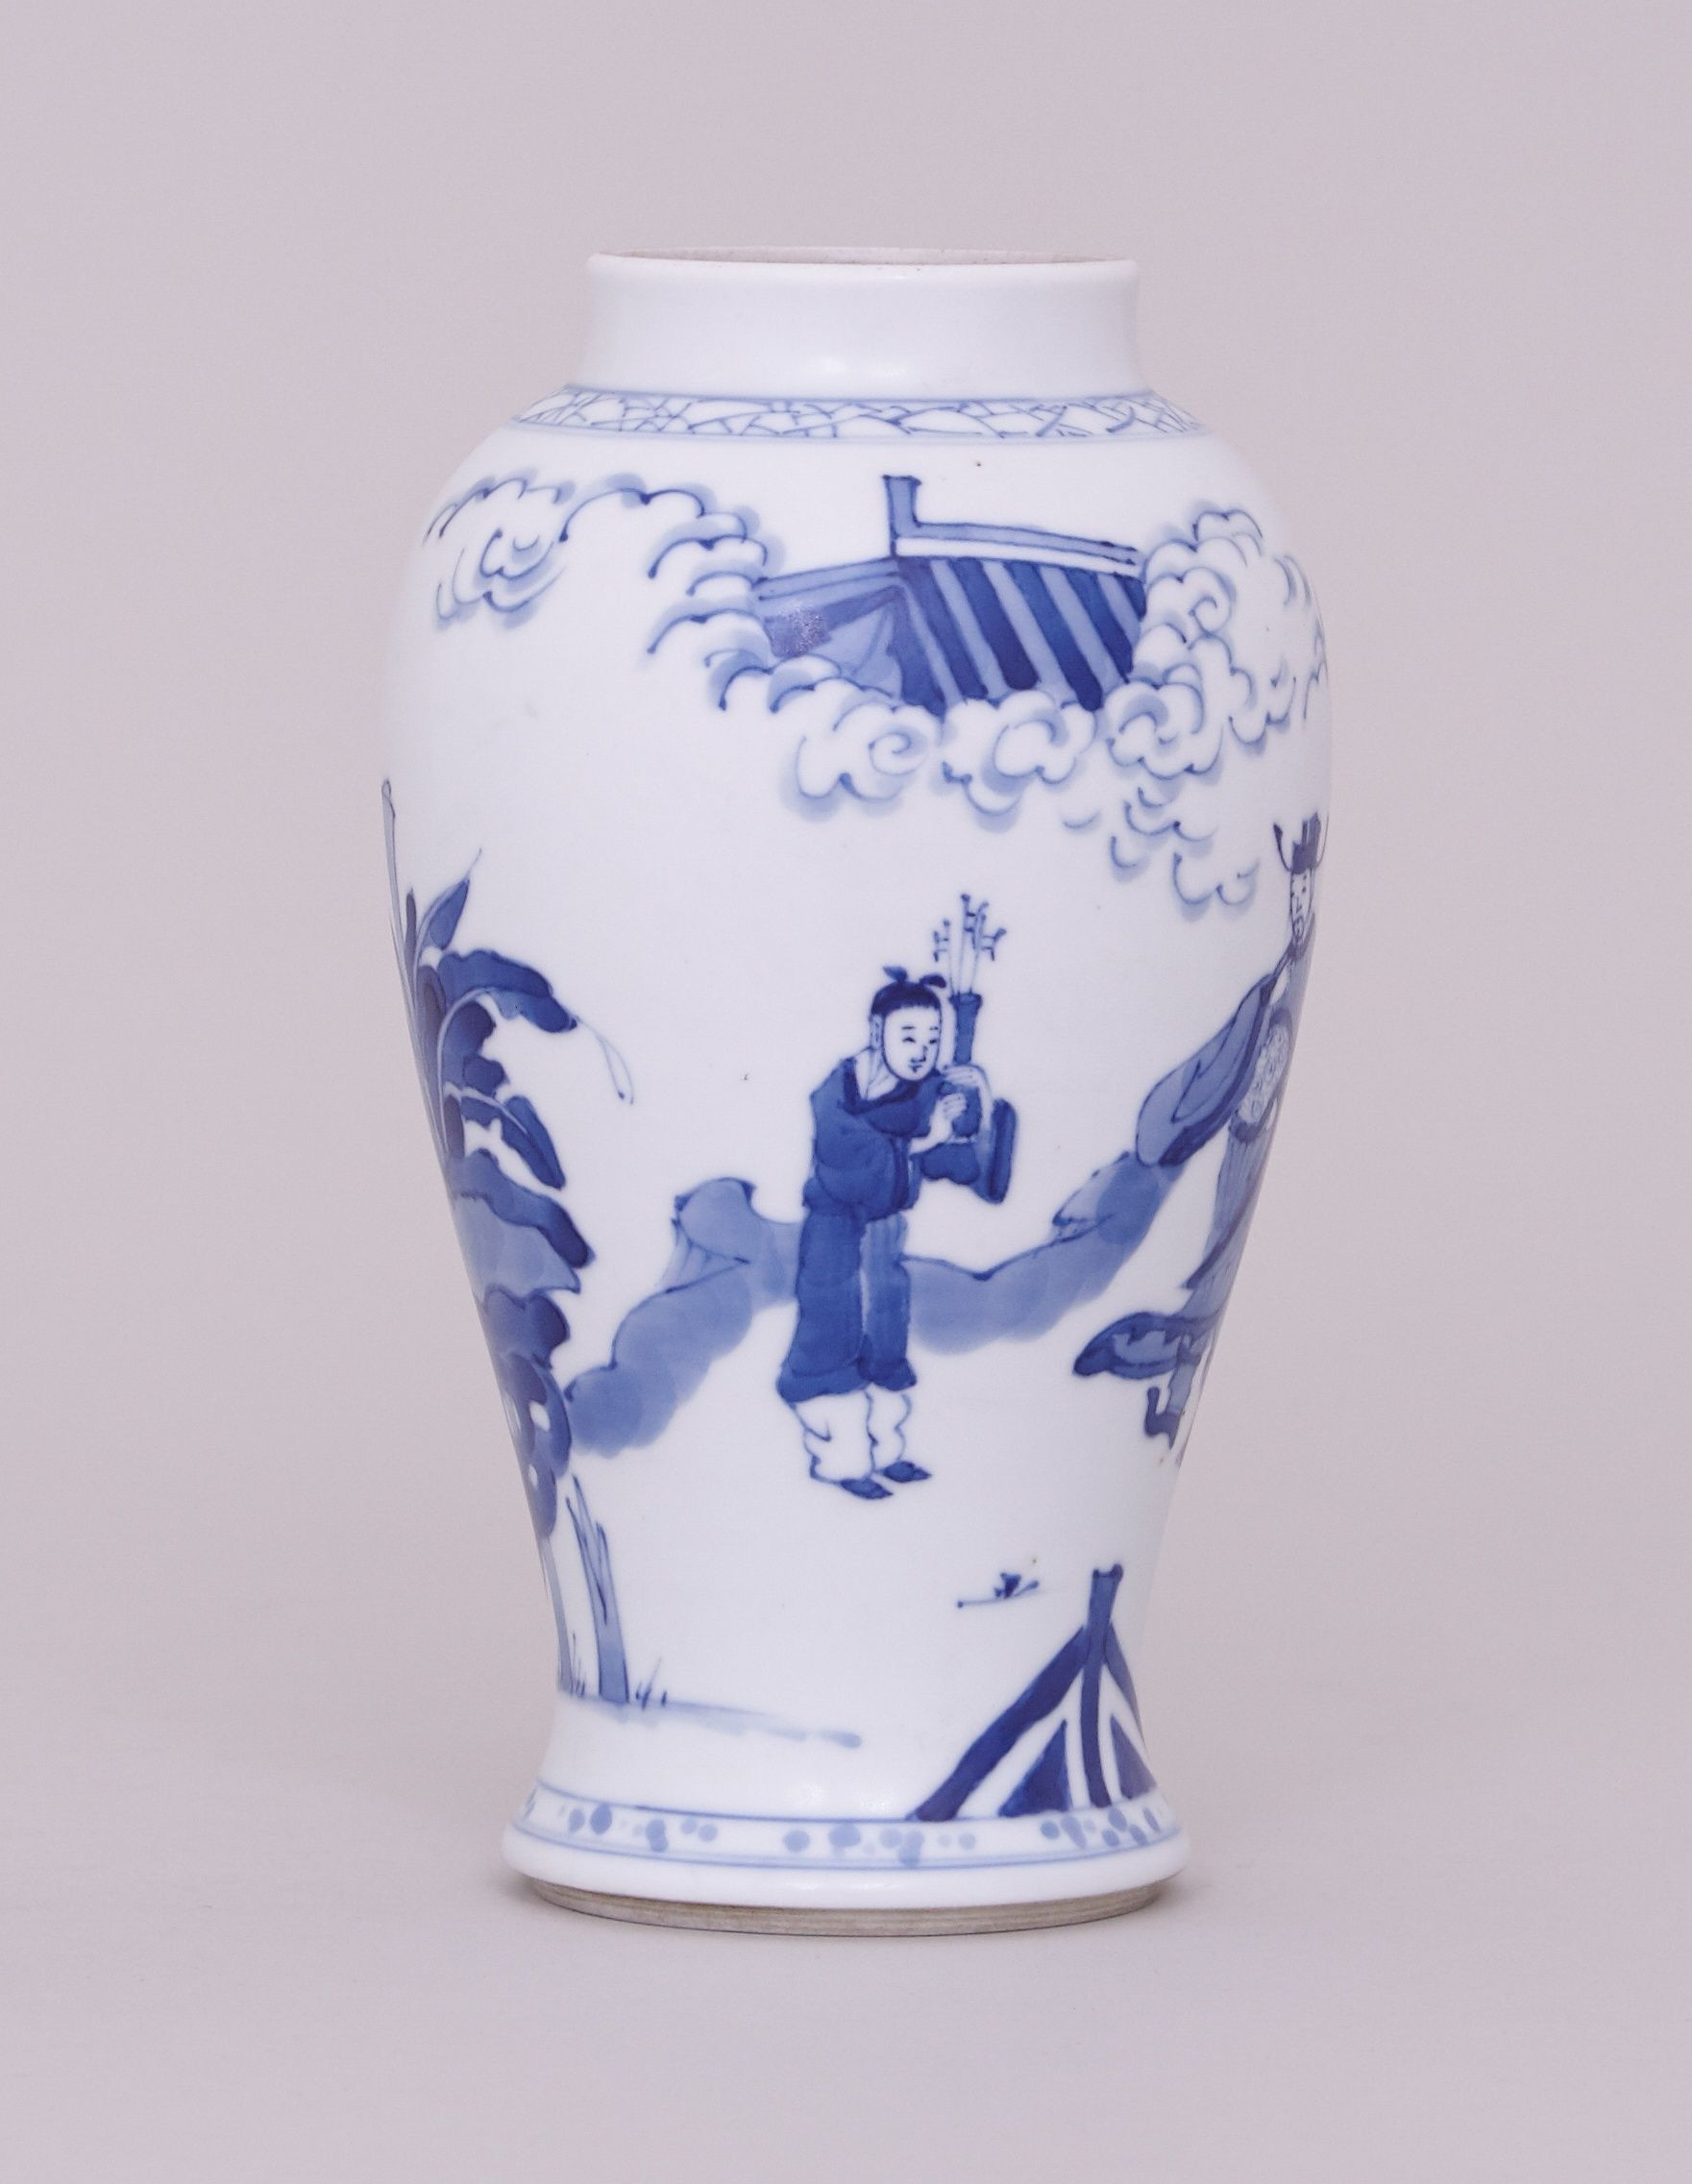 16 Stylish Big Clear Vase 2022 free download big clear vase of 32 wide mouth vase the weekly world throughout a chinese blue and white vase kangxi 1662 1722